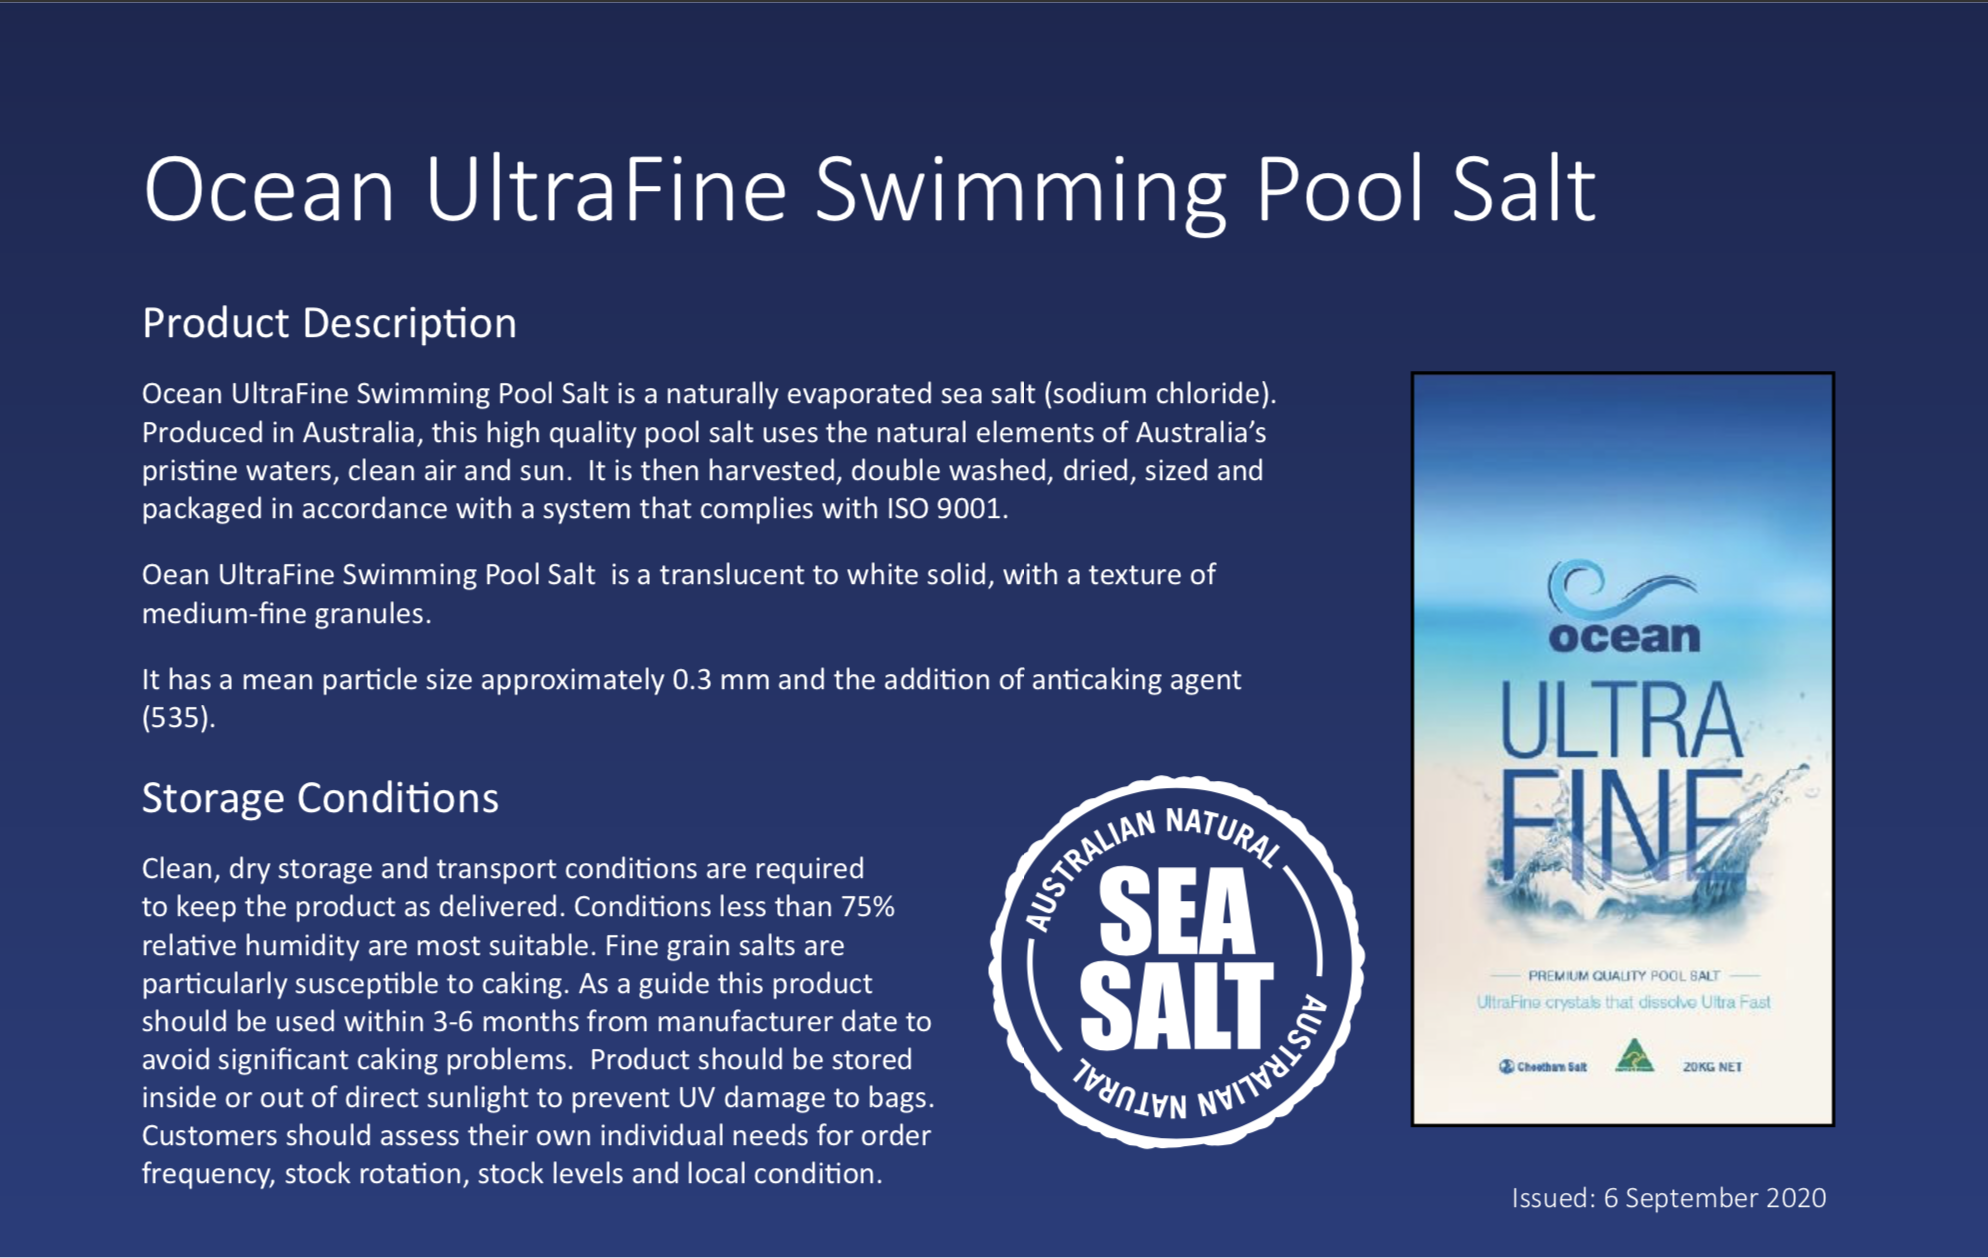 Ocean UltraFine Swimming Pool Salt product description. This swimming pool salt product description includes a photo of the product along with storage conditions.